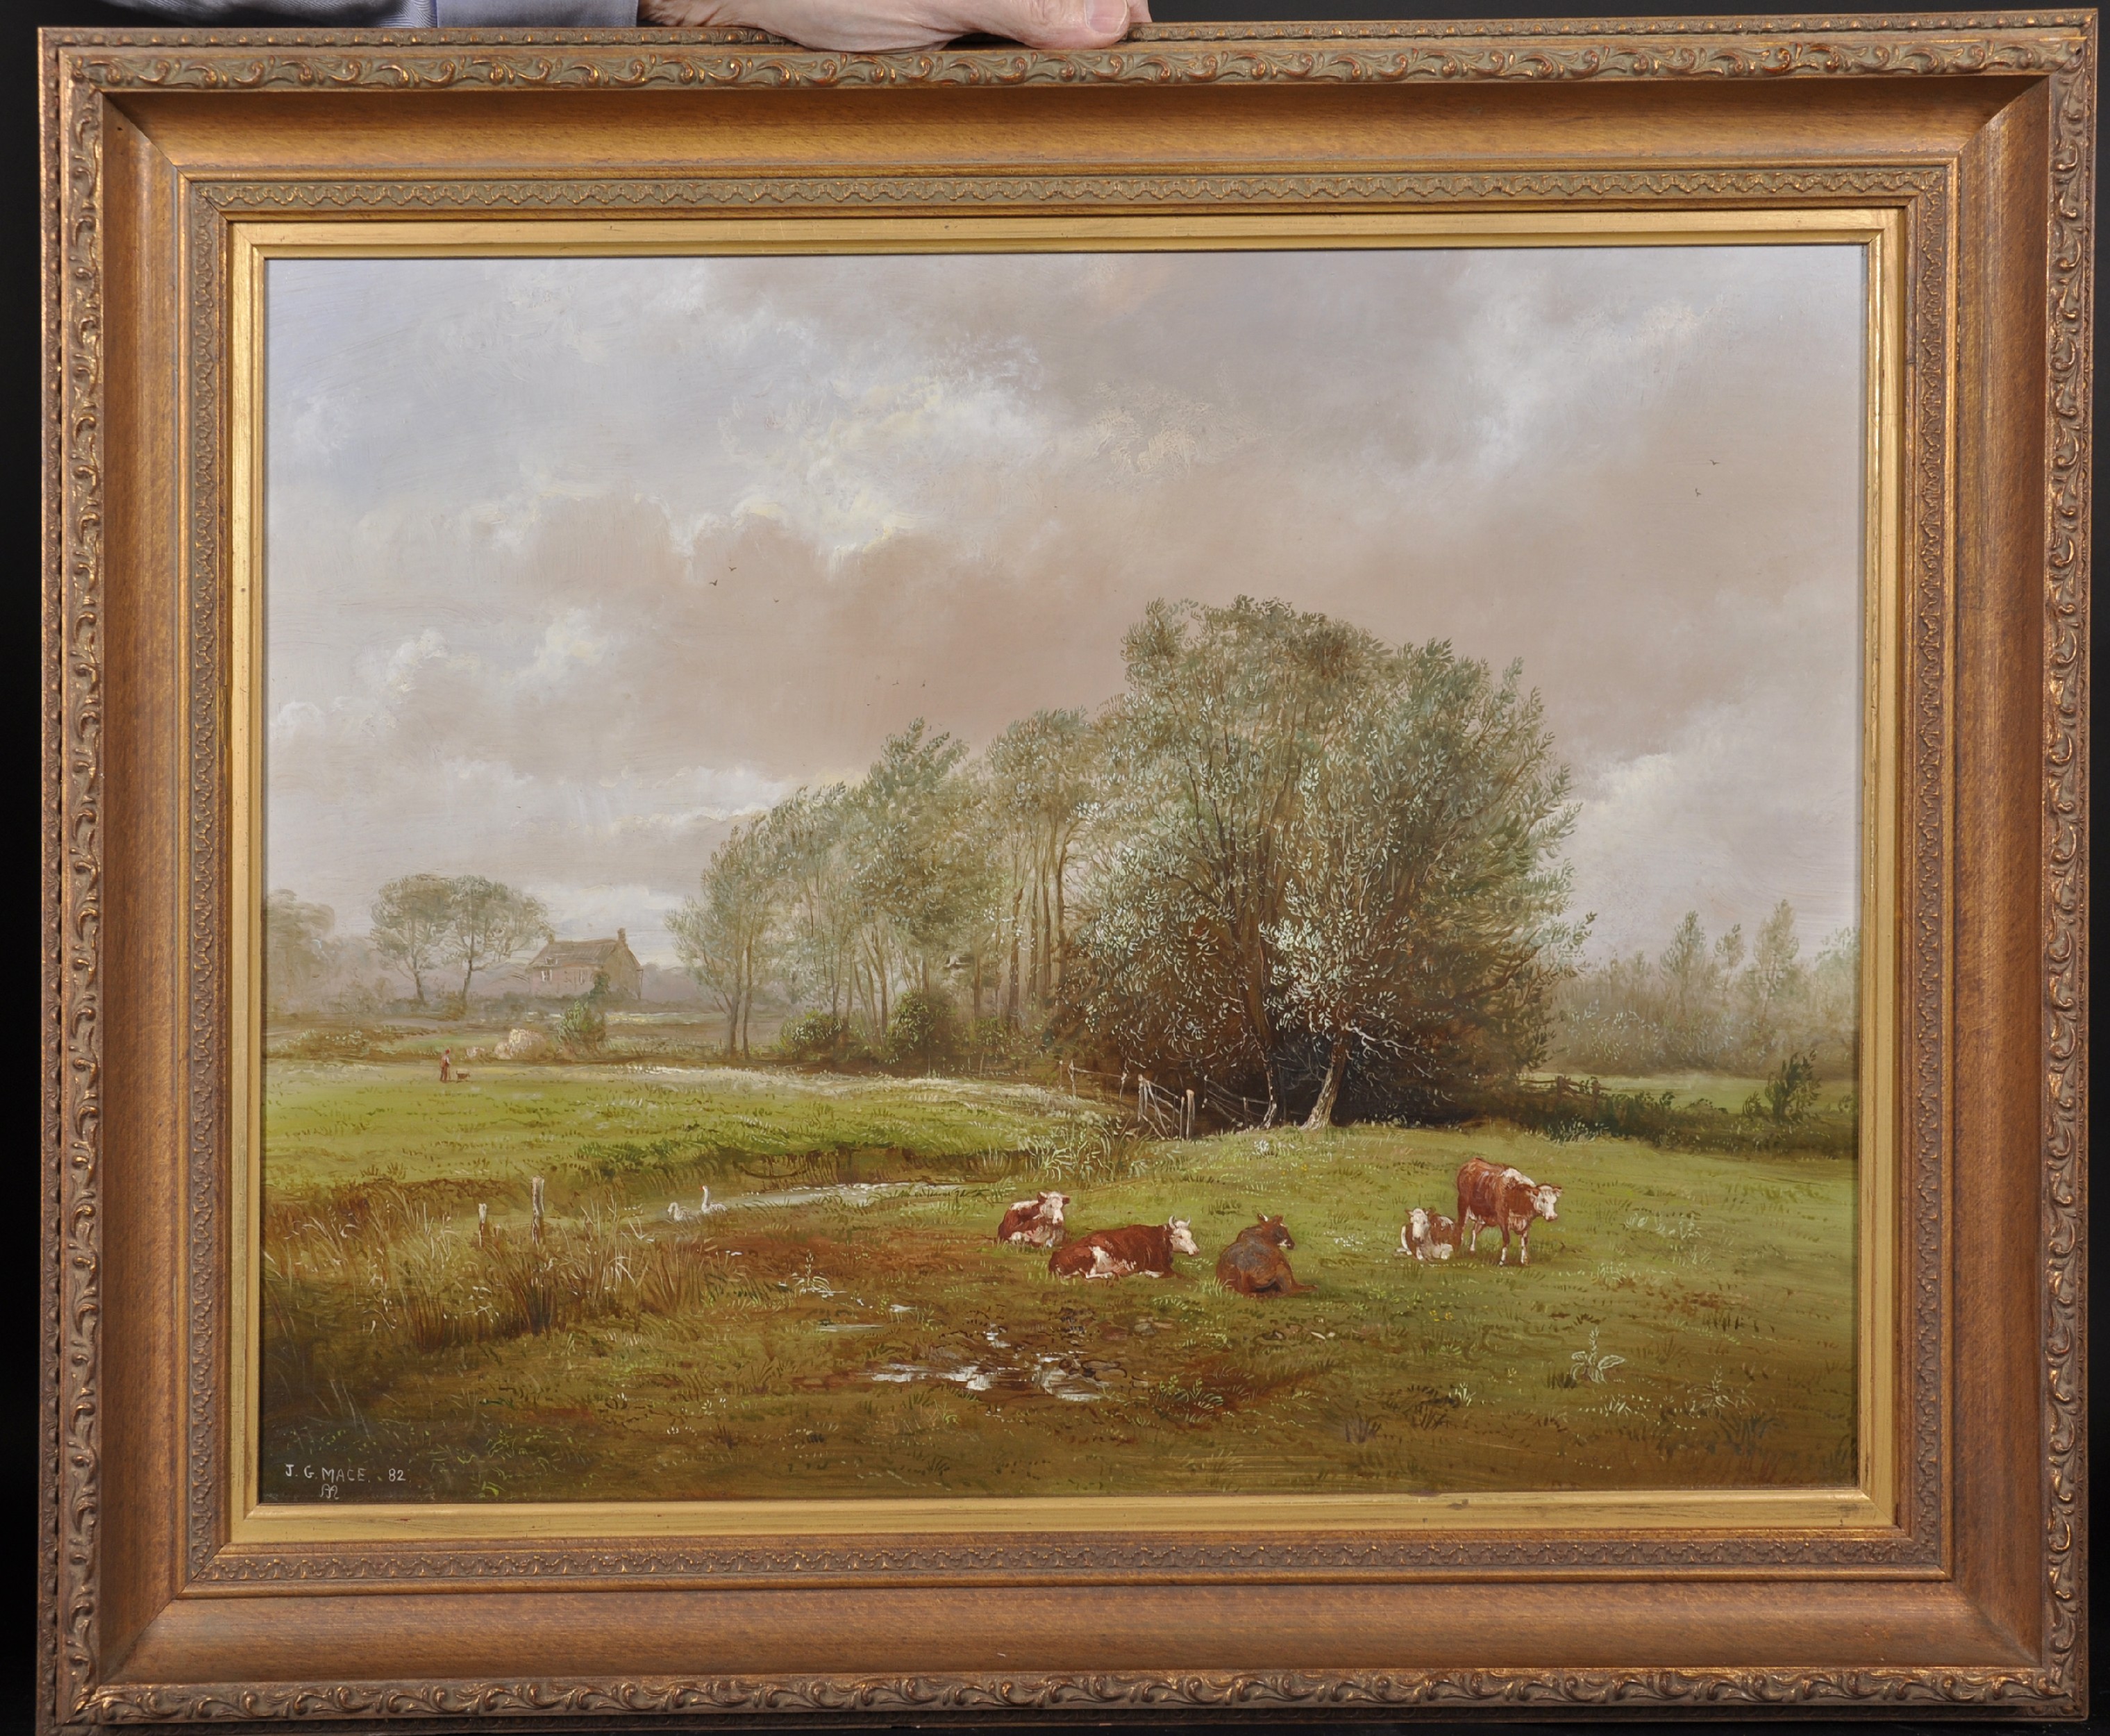 John G Mace (20th - 21st Century) British. A River Landscape, with Cattle in a Field, Oil on - Image 2 of 4